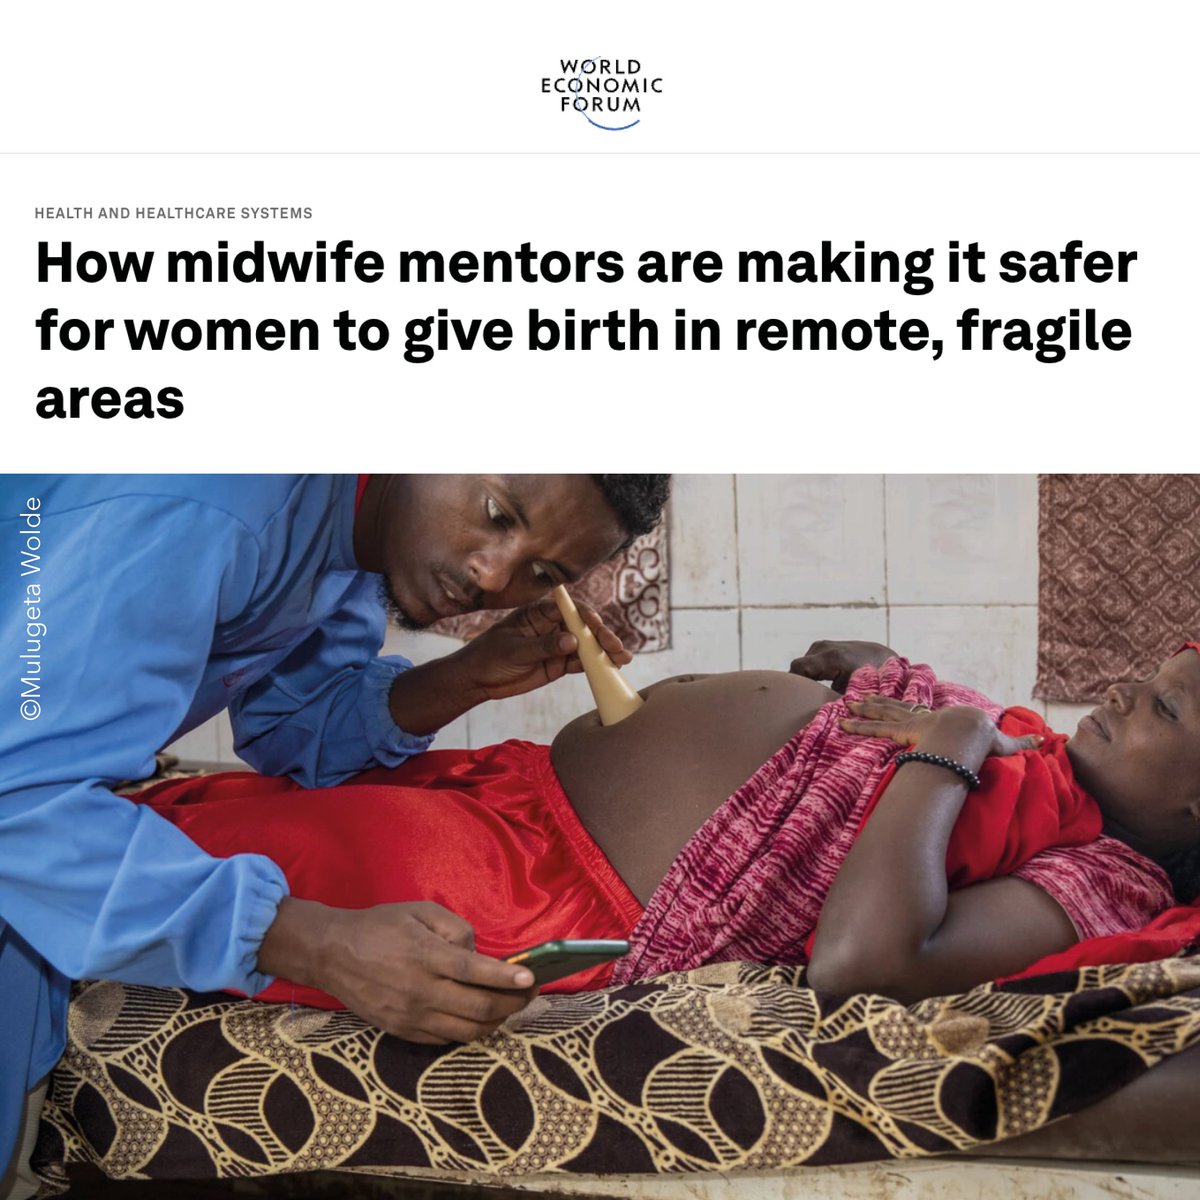 In the run up to #MothersDay, our CEO Anna Frellsen has written a @WEF blog post on our innovative collaboration with the Ethiopian government, @UNICEF and @UNFPA, ensuring safer births for women and babies in Ethiopia's fragile settings. 👉 bit.ly/3QuOLj1